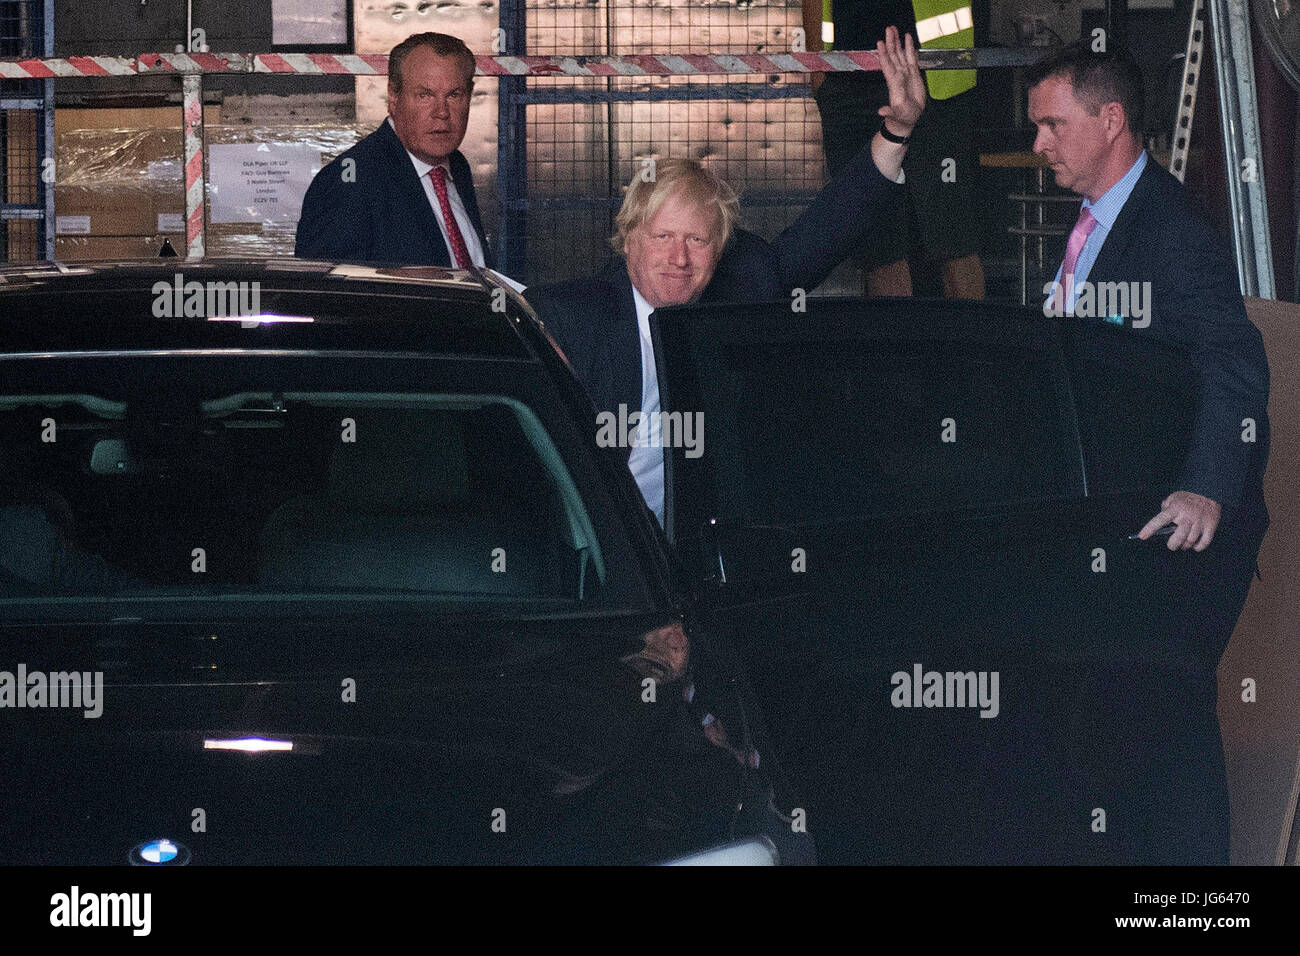 Foreign Secretary Boris Johnson waves to the waiting media after speaking at the launch of Stonewall's Global Workplace Equality Index at the Andaz Hotel in the City of London. Stock Photo